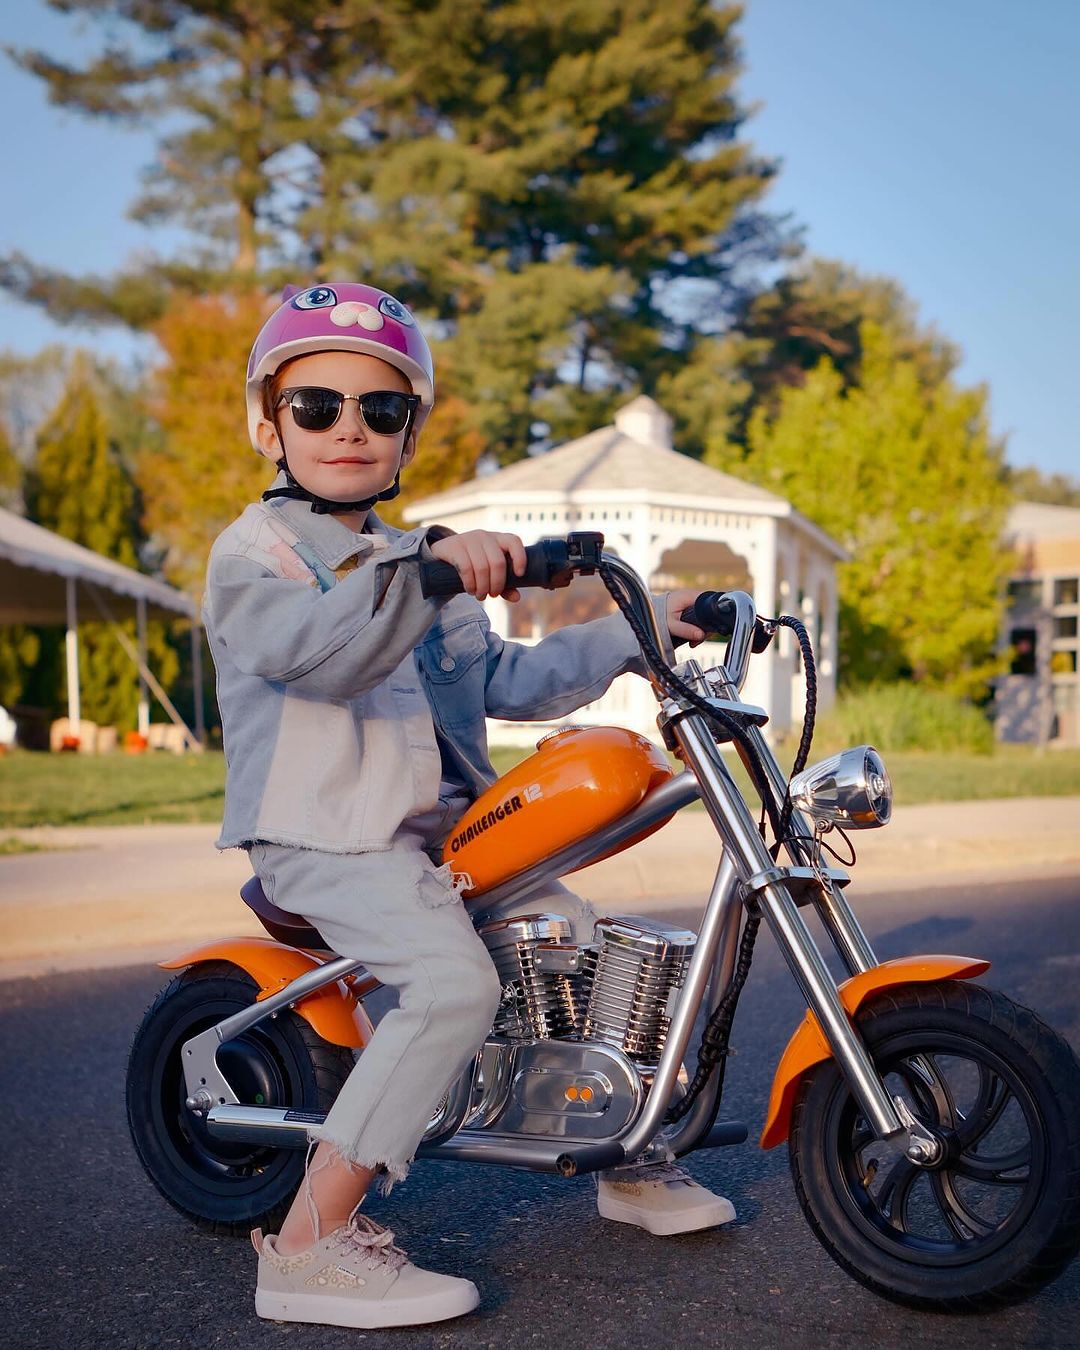 How to Transition Kids from Bikes to Motorcycles